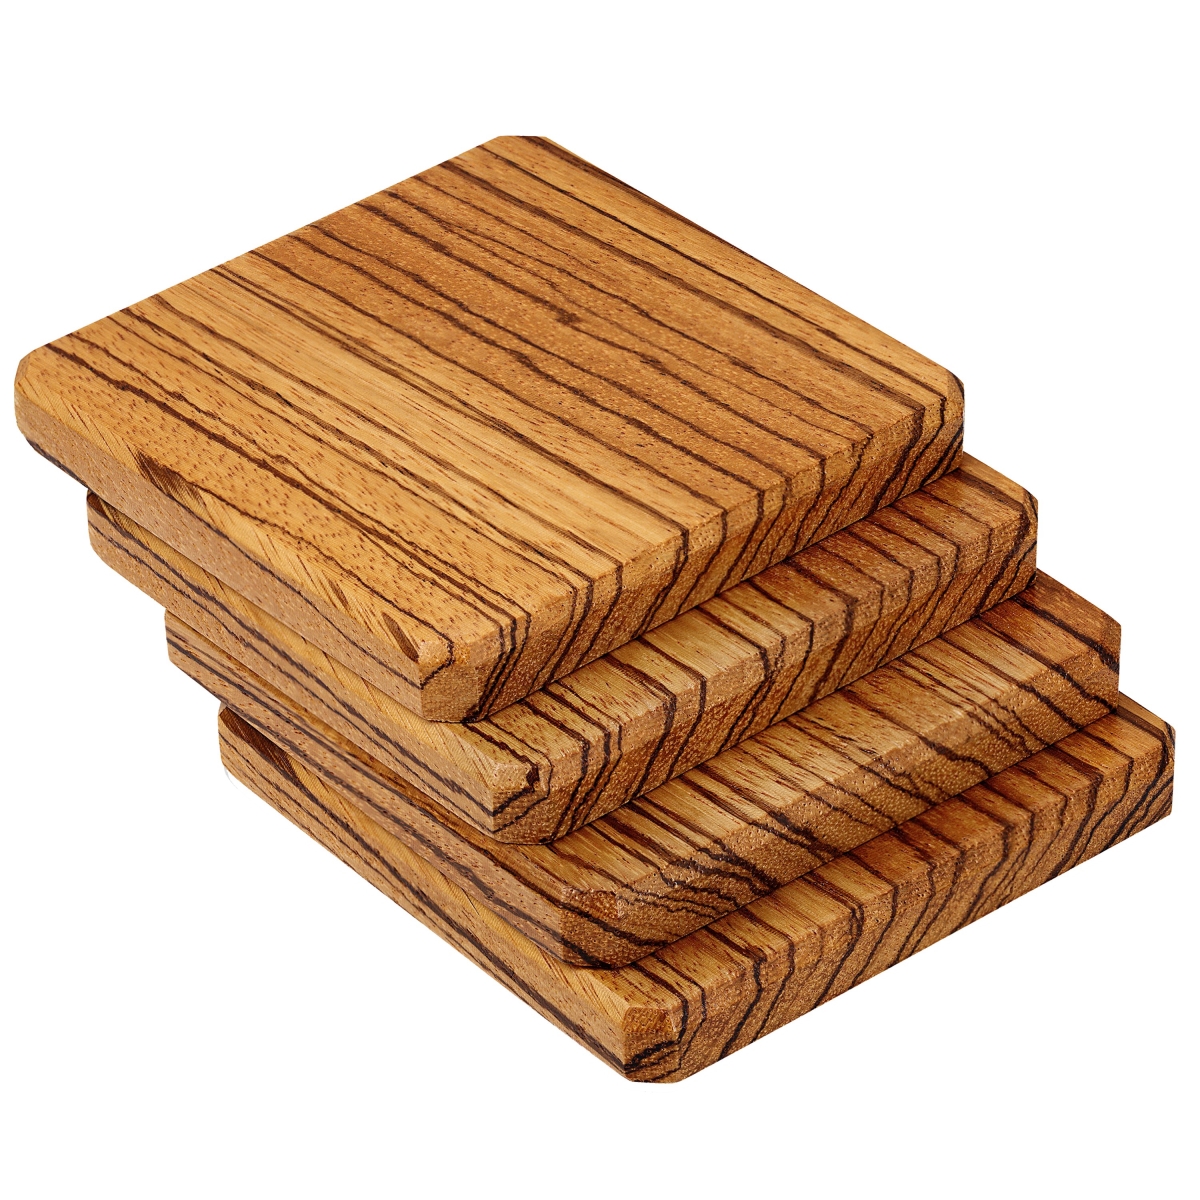 Picture of A & E Millwork AEM-5001 Tiger Wood Coasters Edge Grain - Set of 4